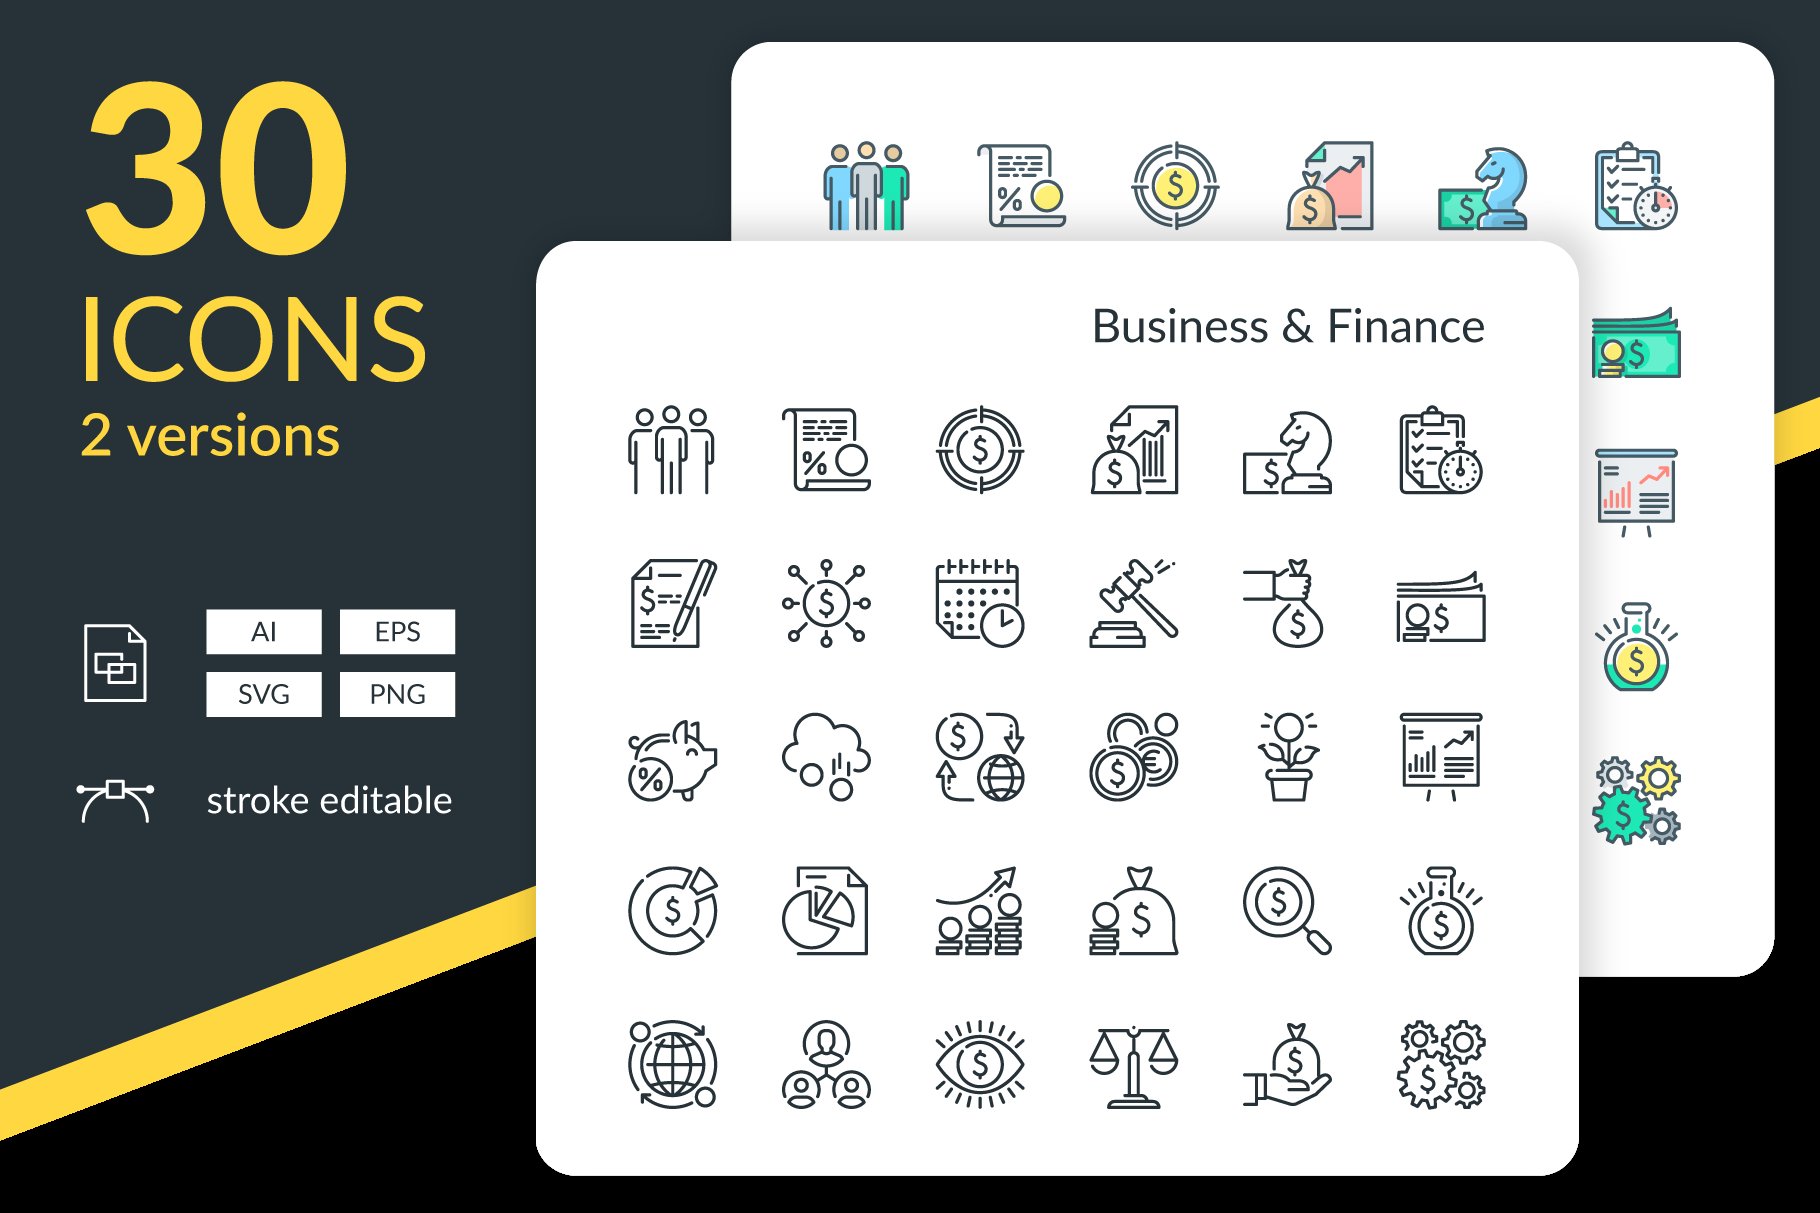 Business and Finance Icons cover image.